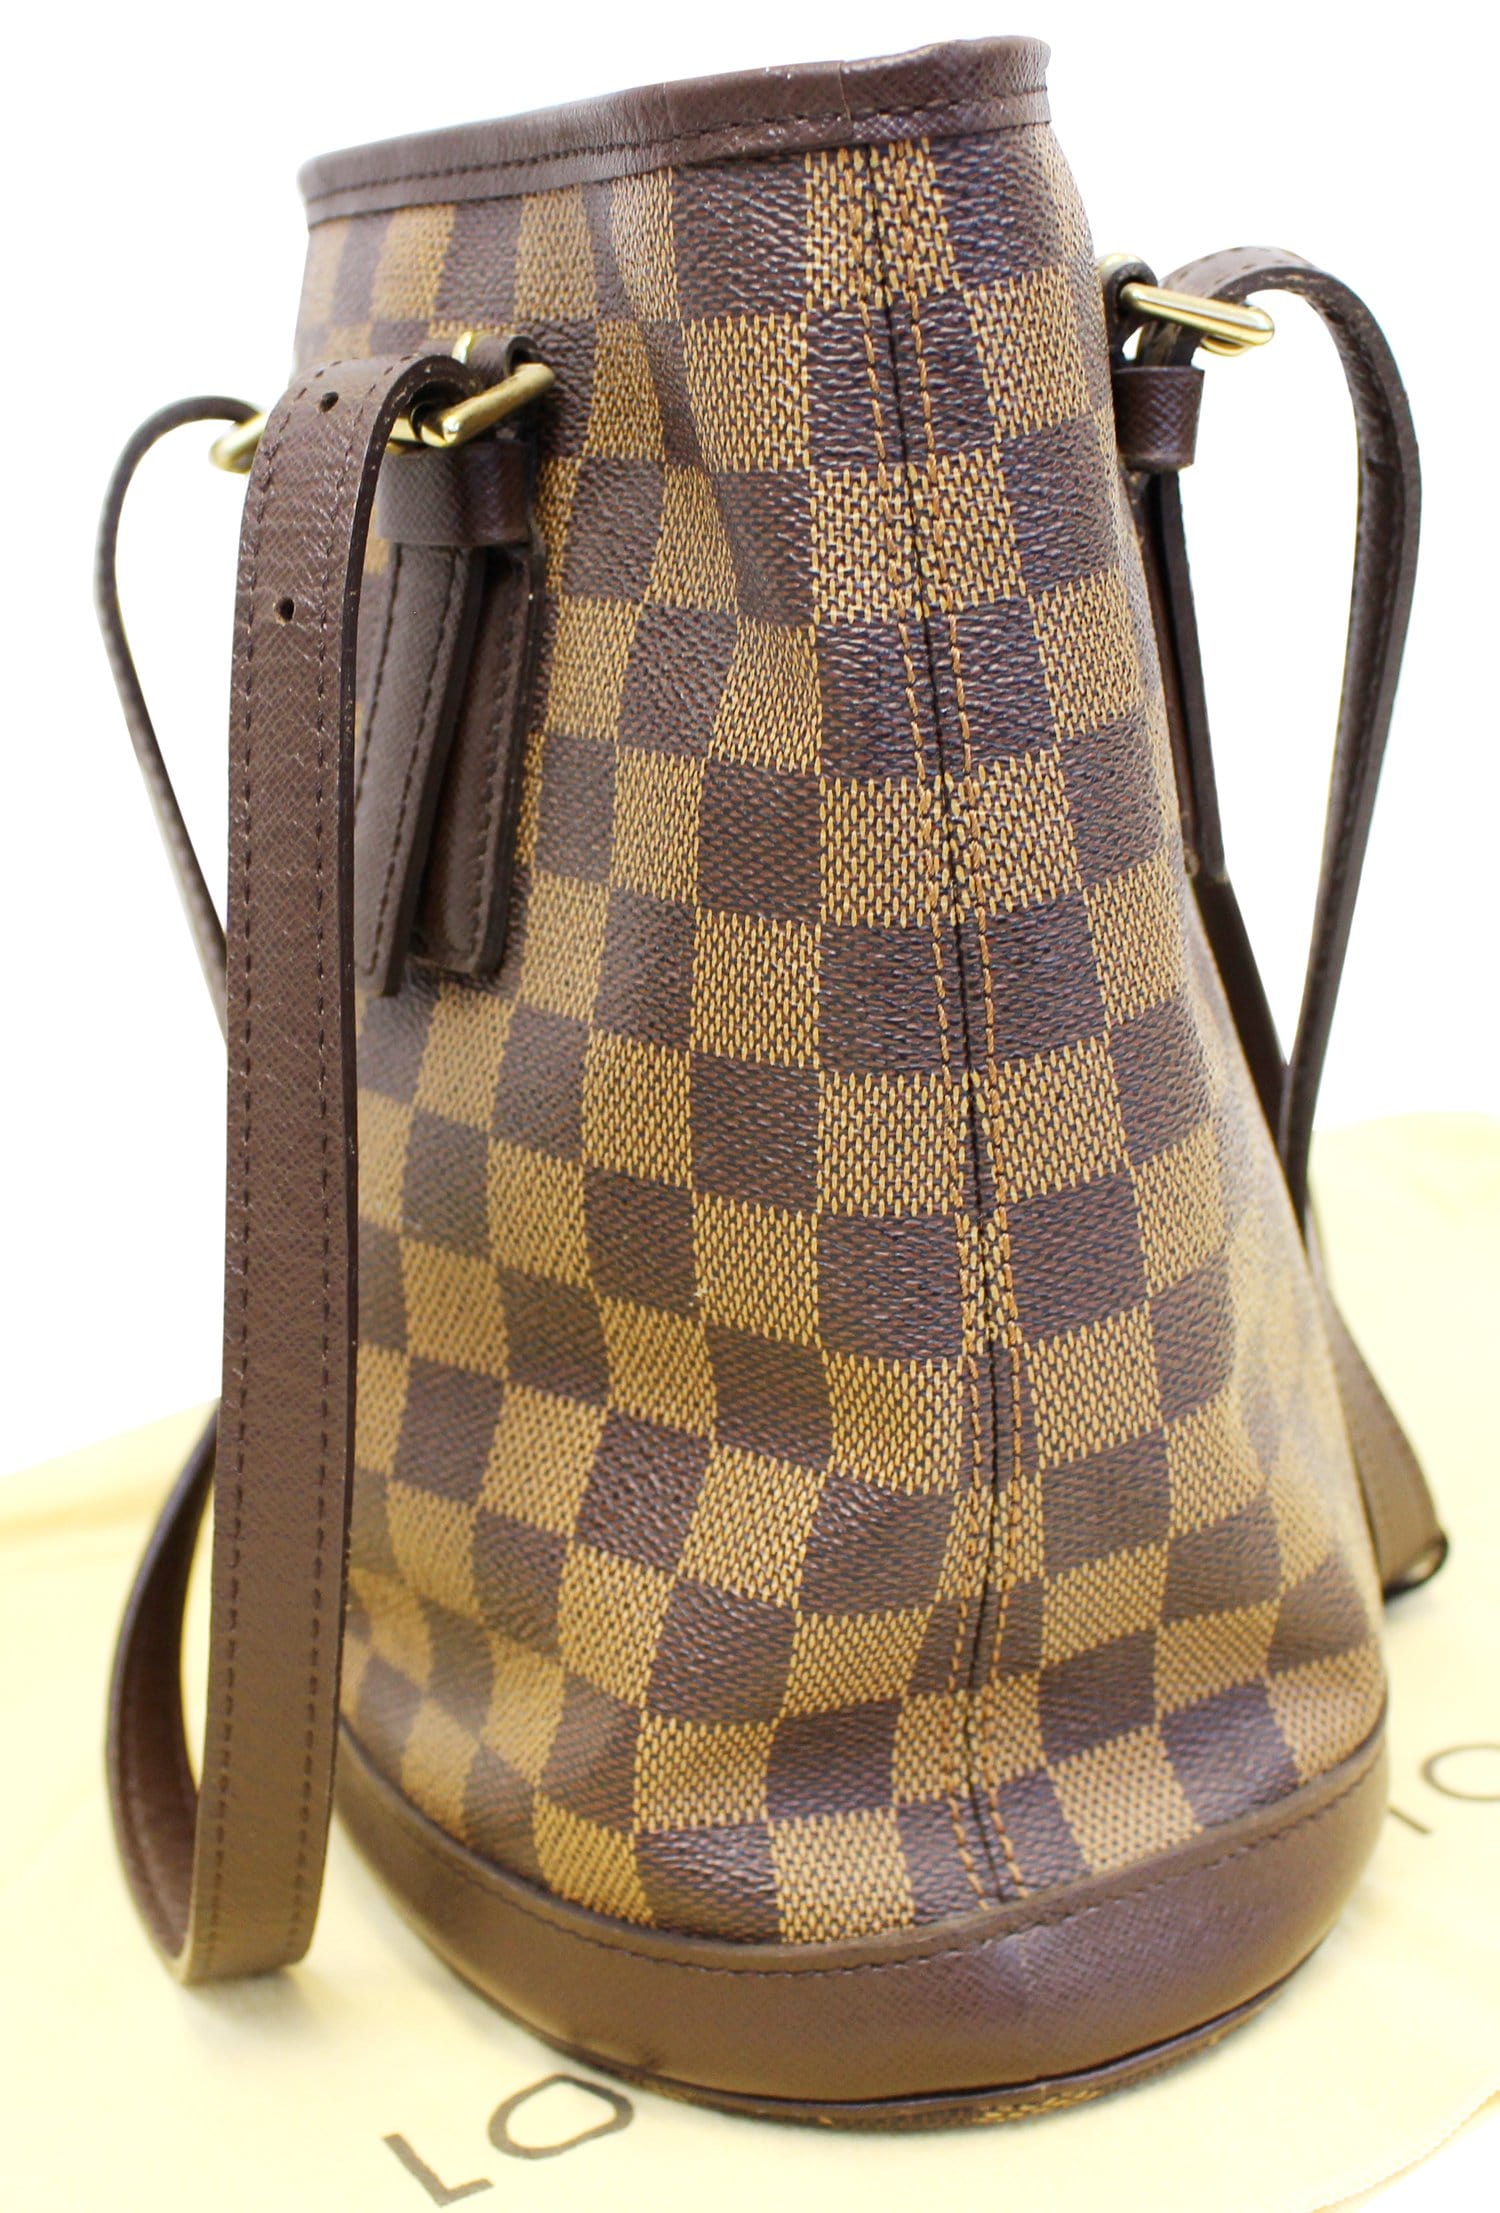 Cleaning and Conditioning Louis Vuitton Damier Ebene Marais Bucket